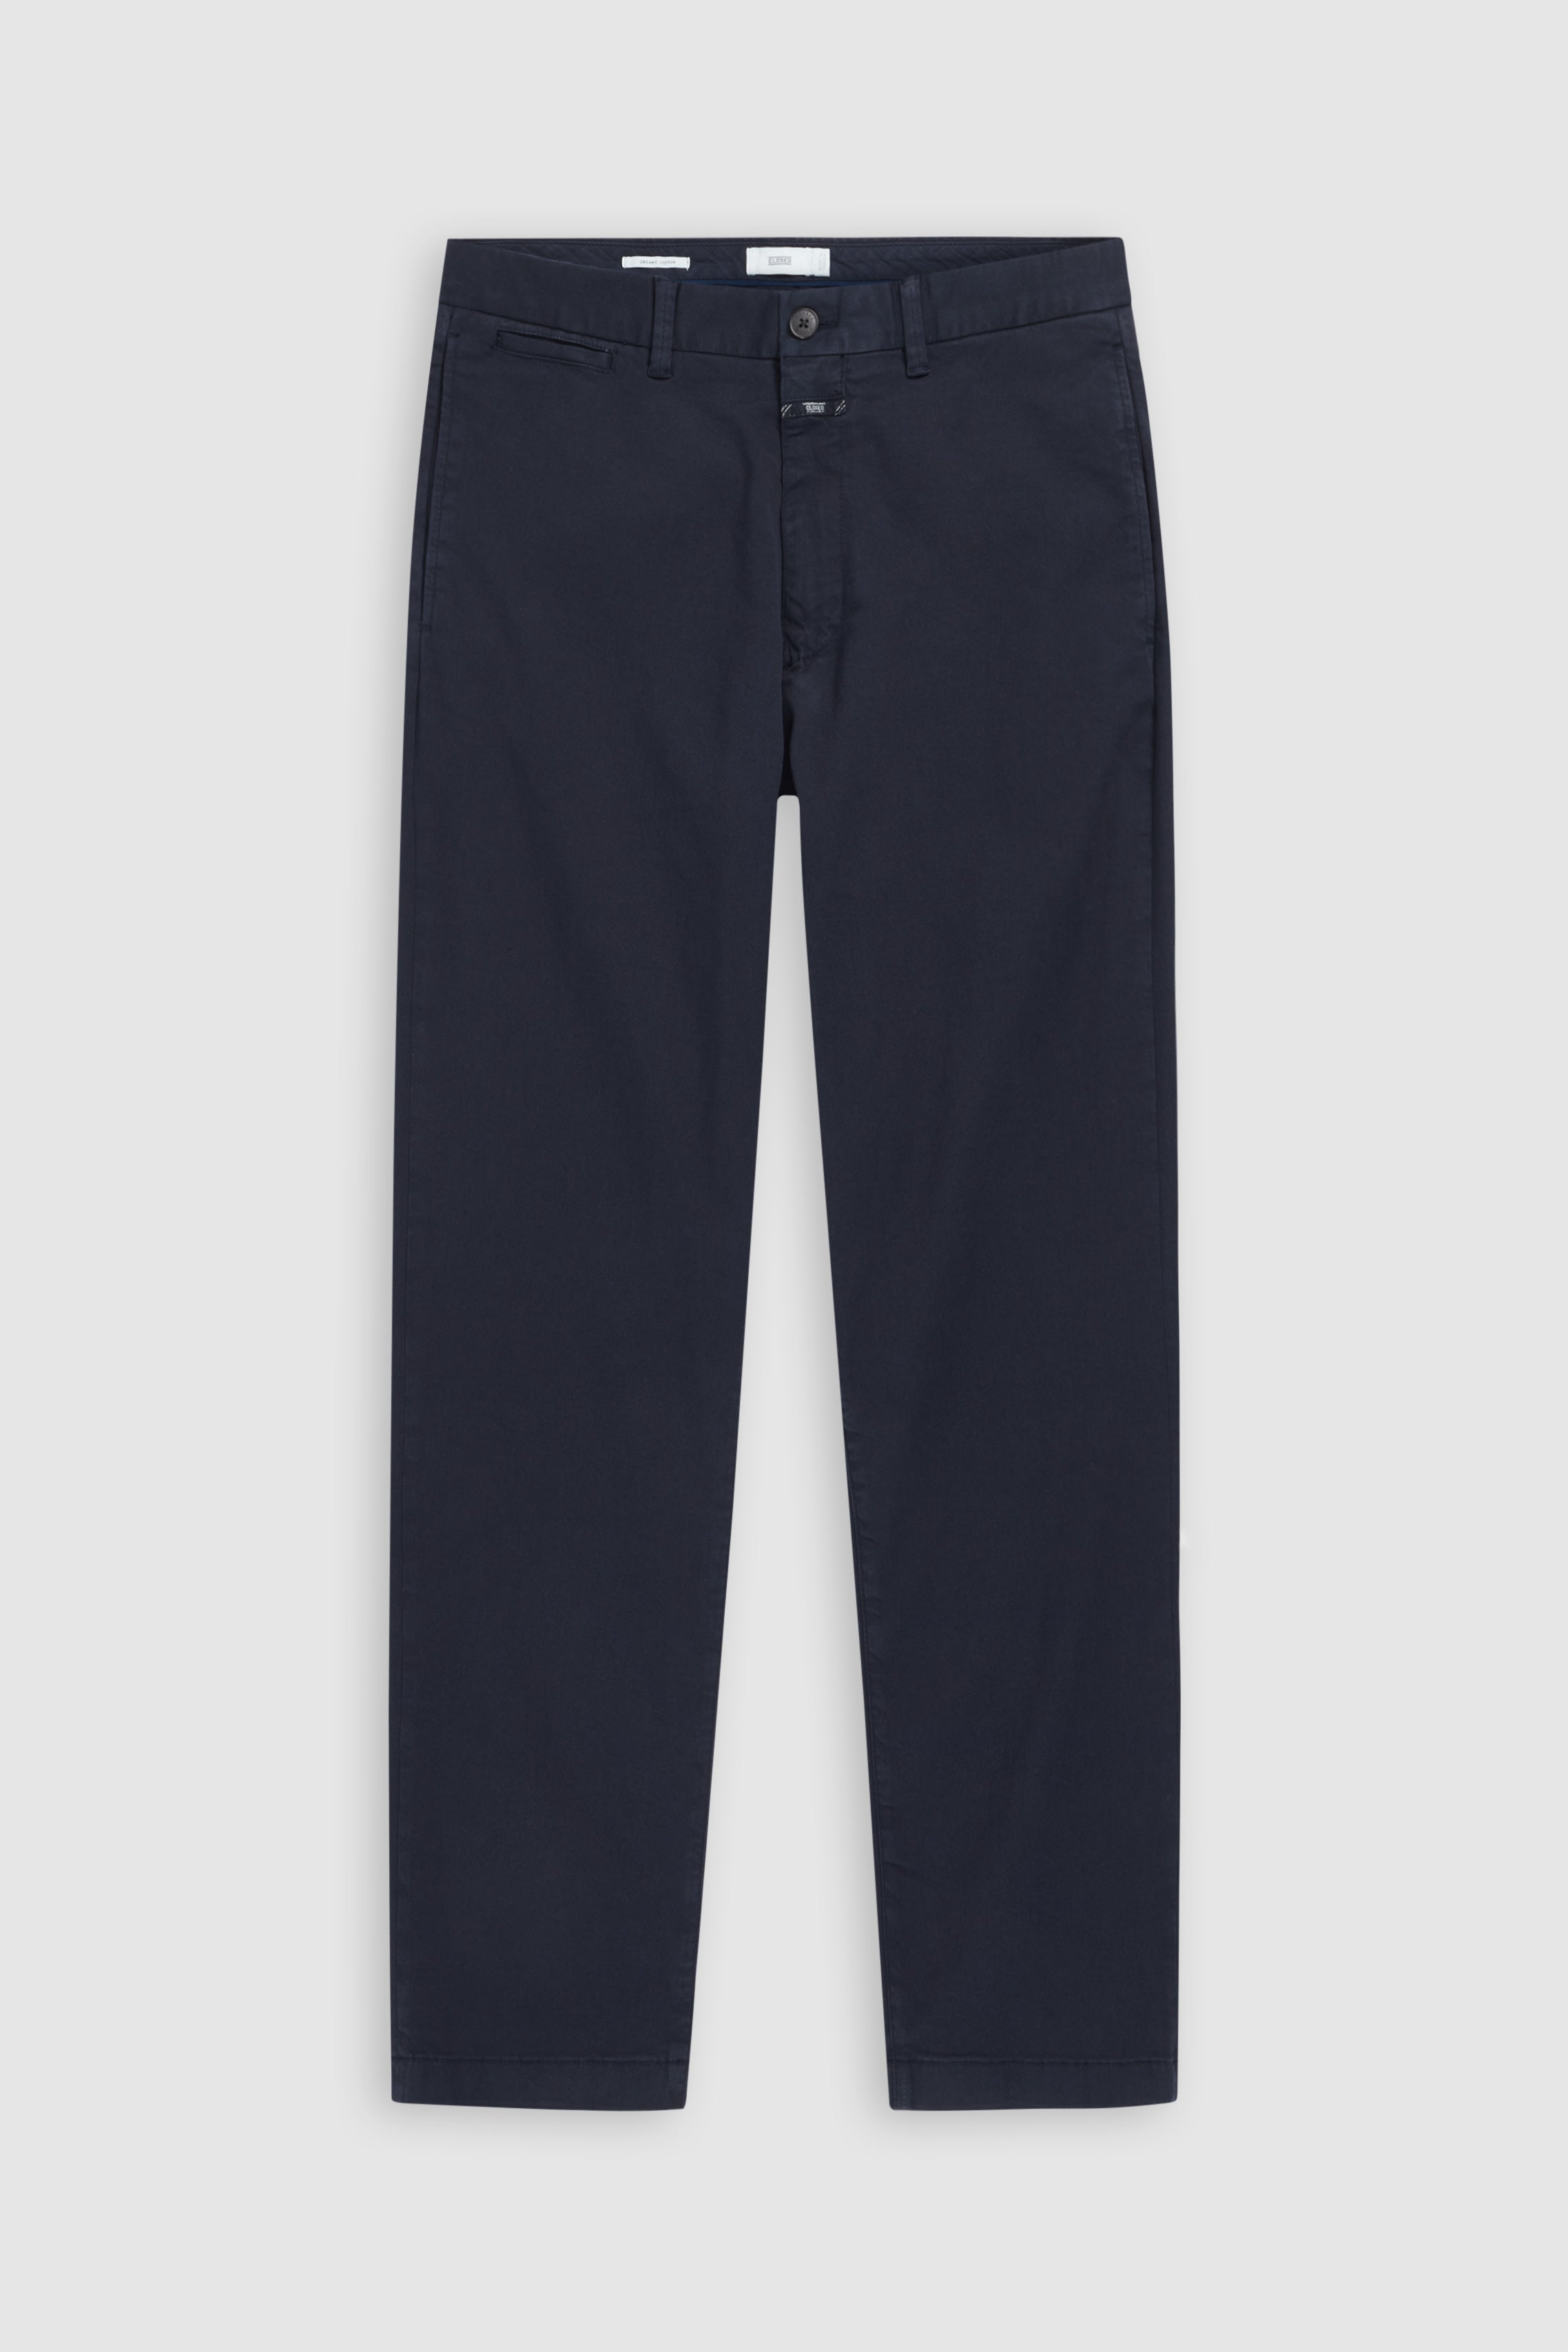 STYLE NAME TACOMA TAPERED PANTS